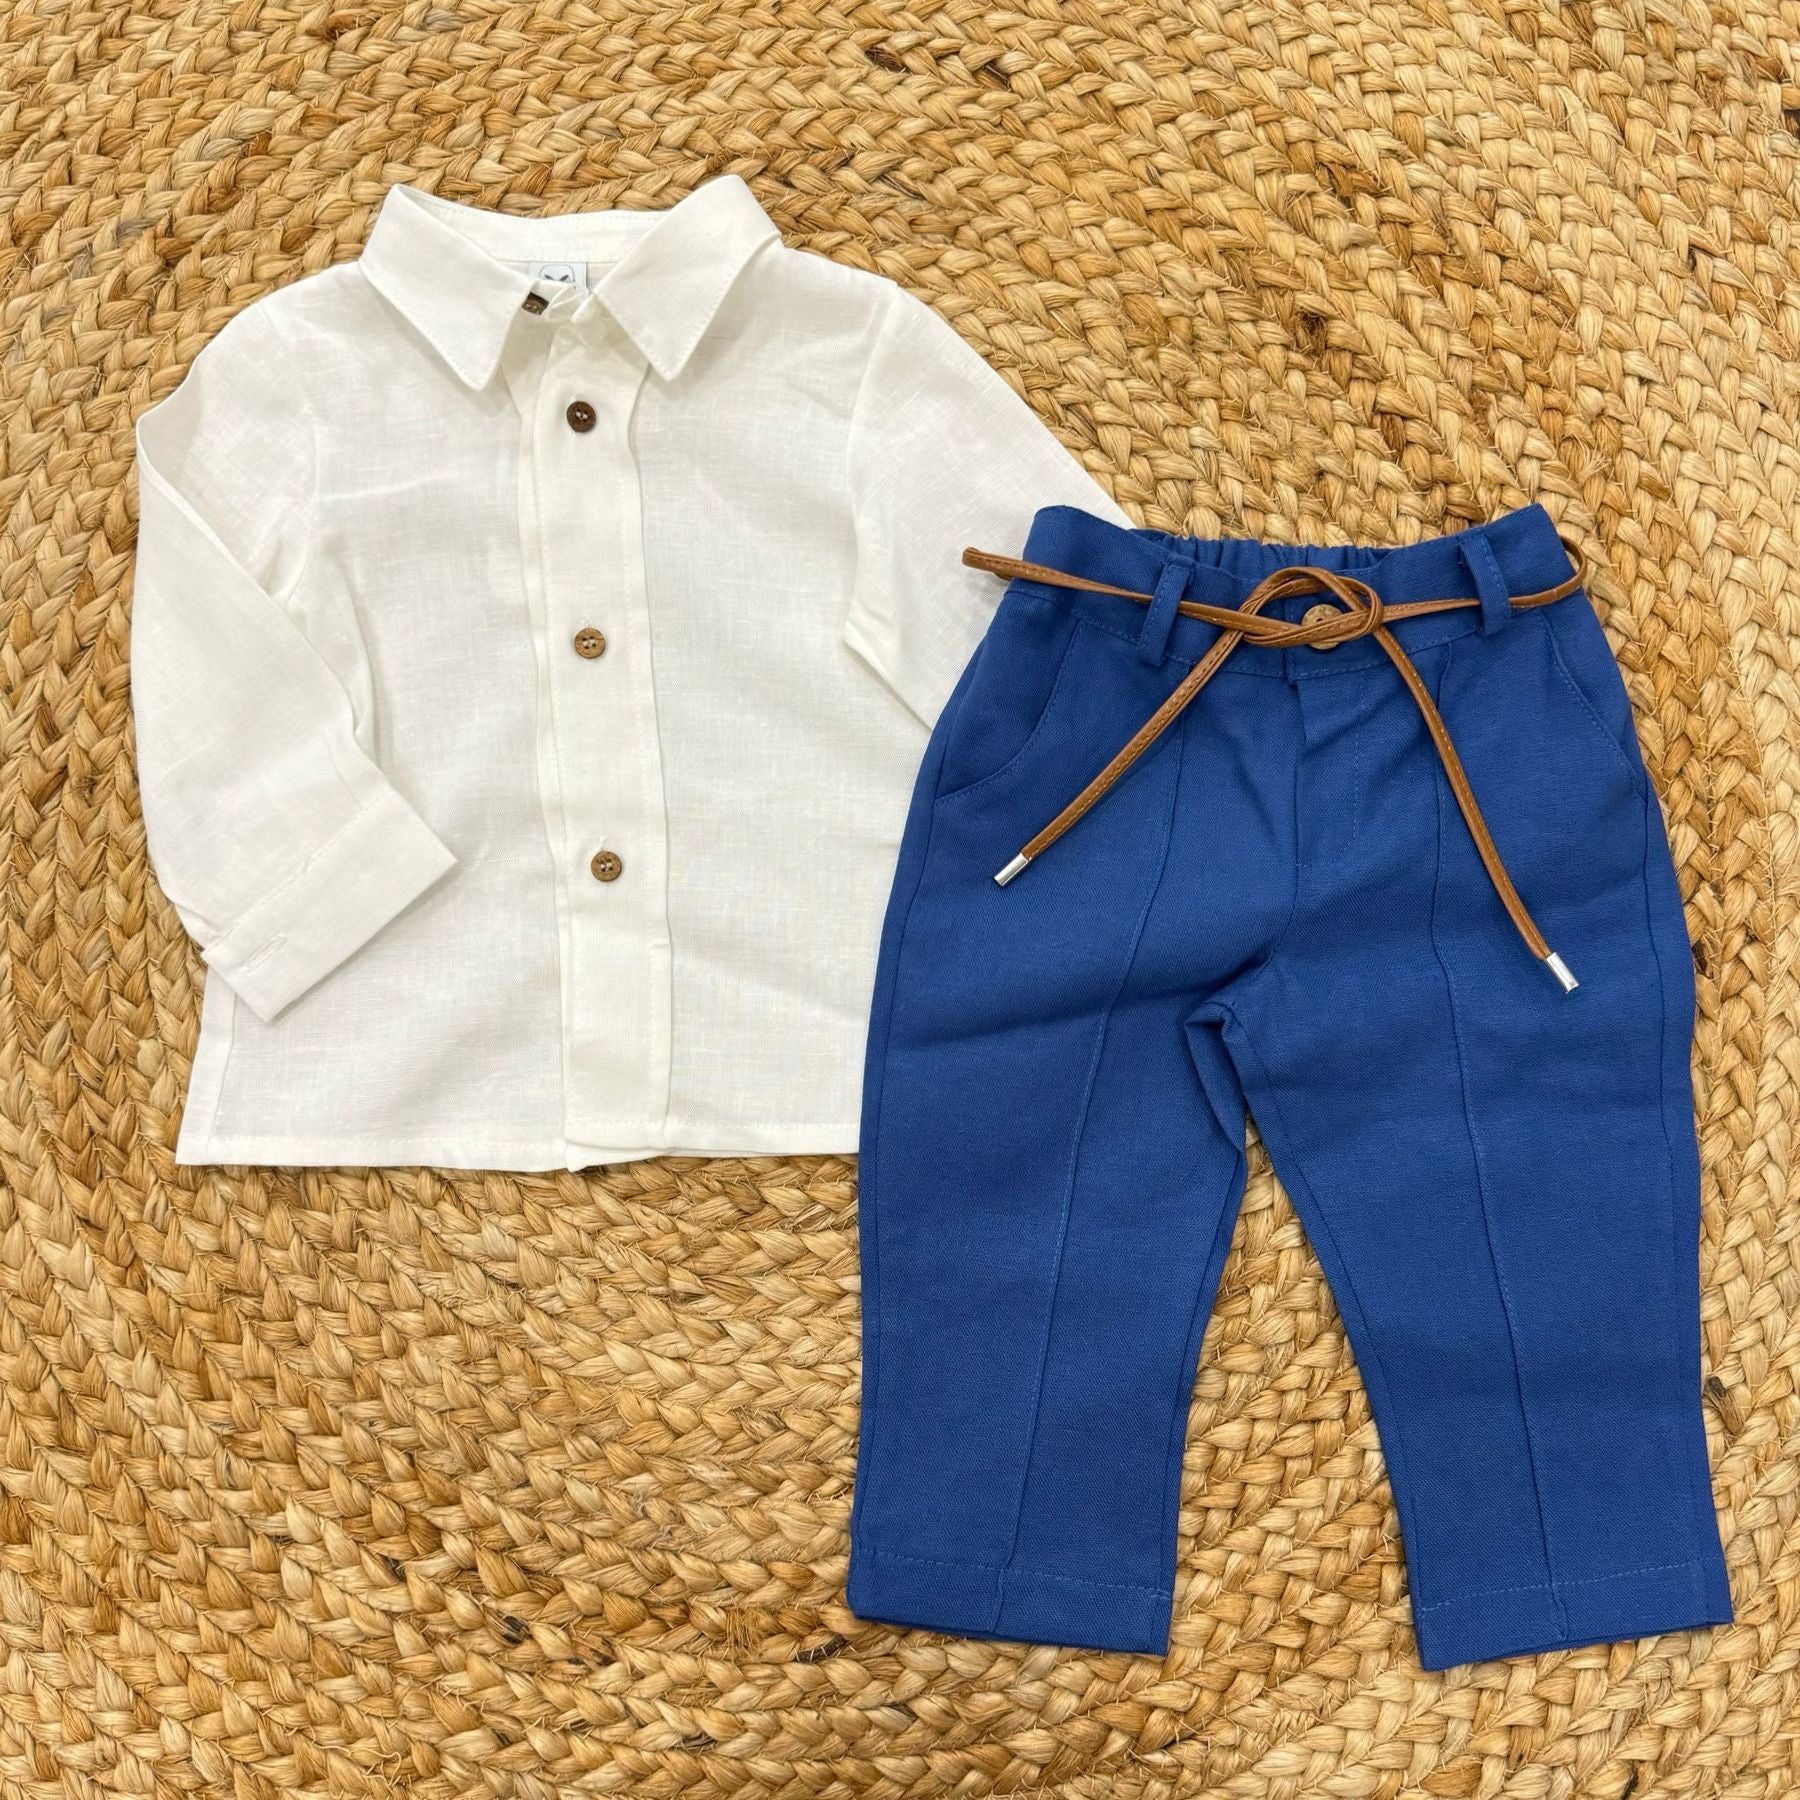 The complete layette with belt